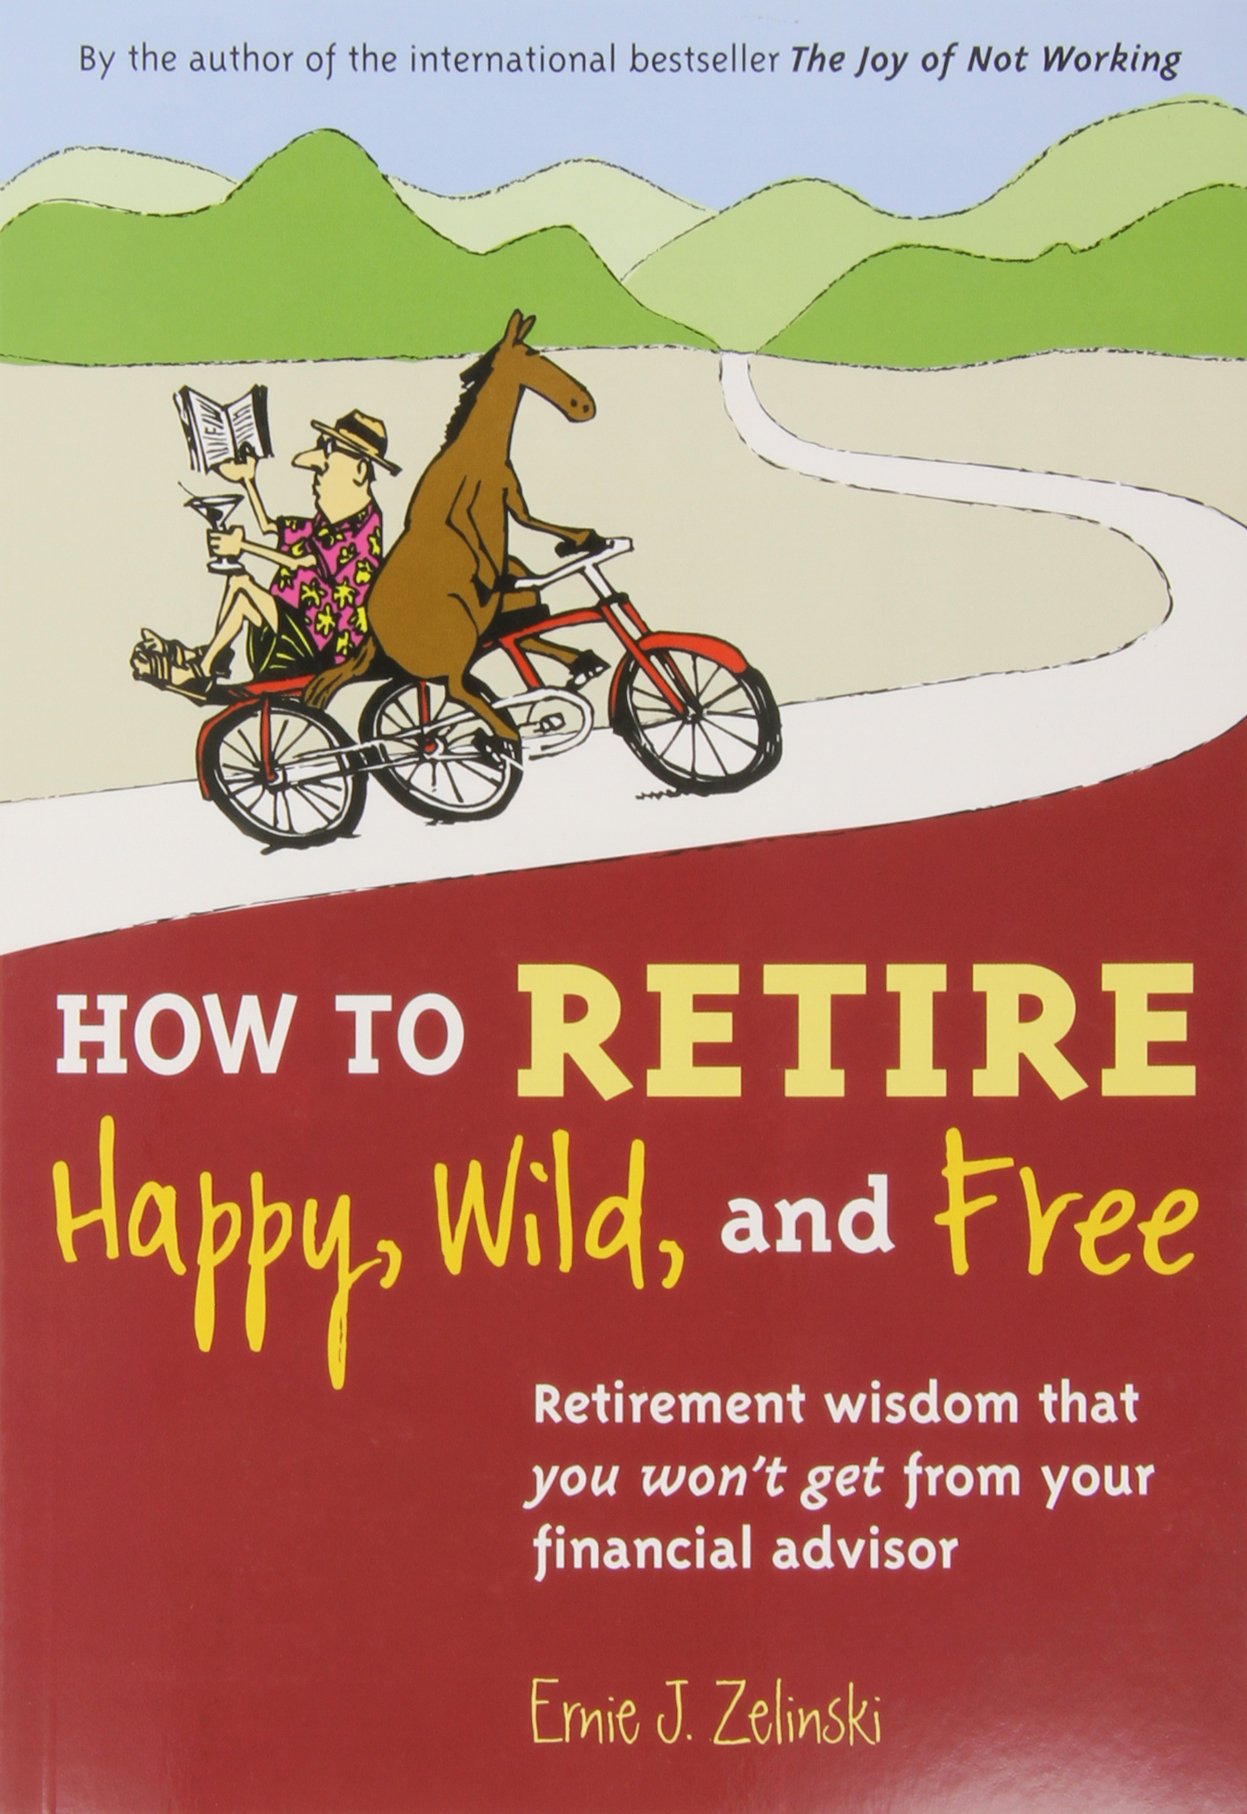 You are currently viewing How to Retire Happy, Wild, and Free: Retirement Wisdom That You Won’t Get from Your Financial Advisor by Ernie J. Zelinski